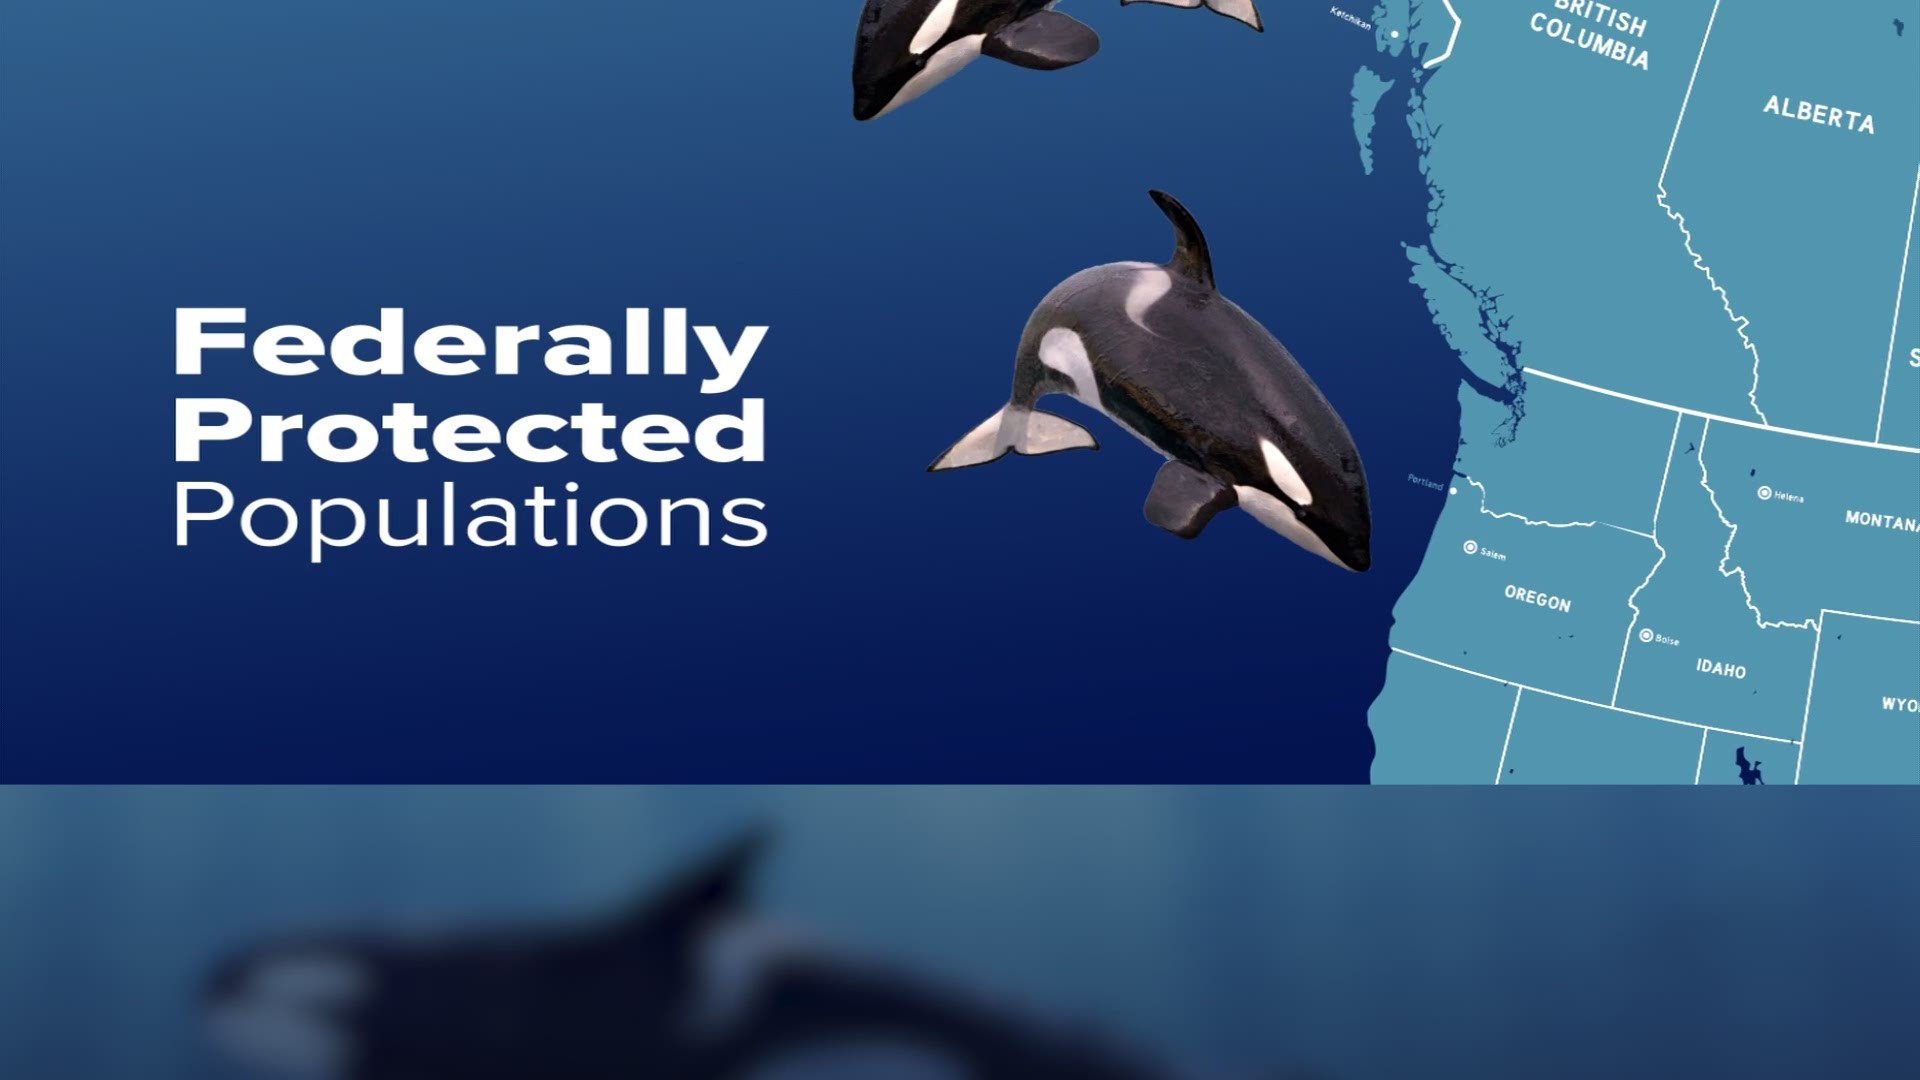 Orca population Only 73 Southern Resident killer whales left in the